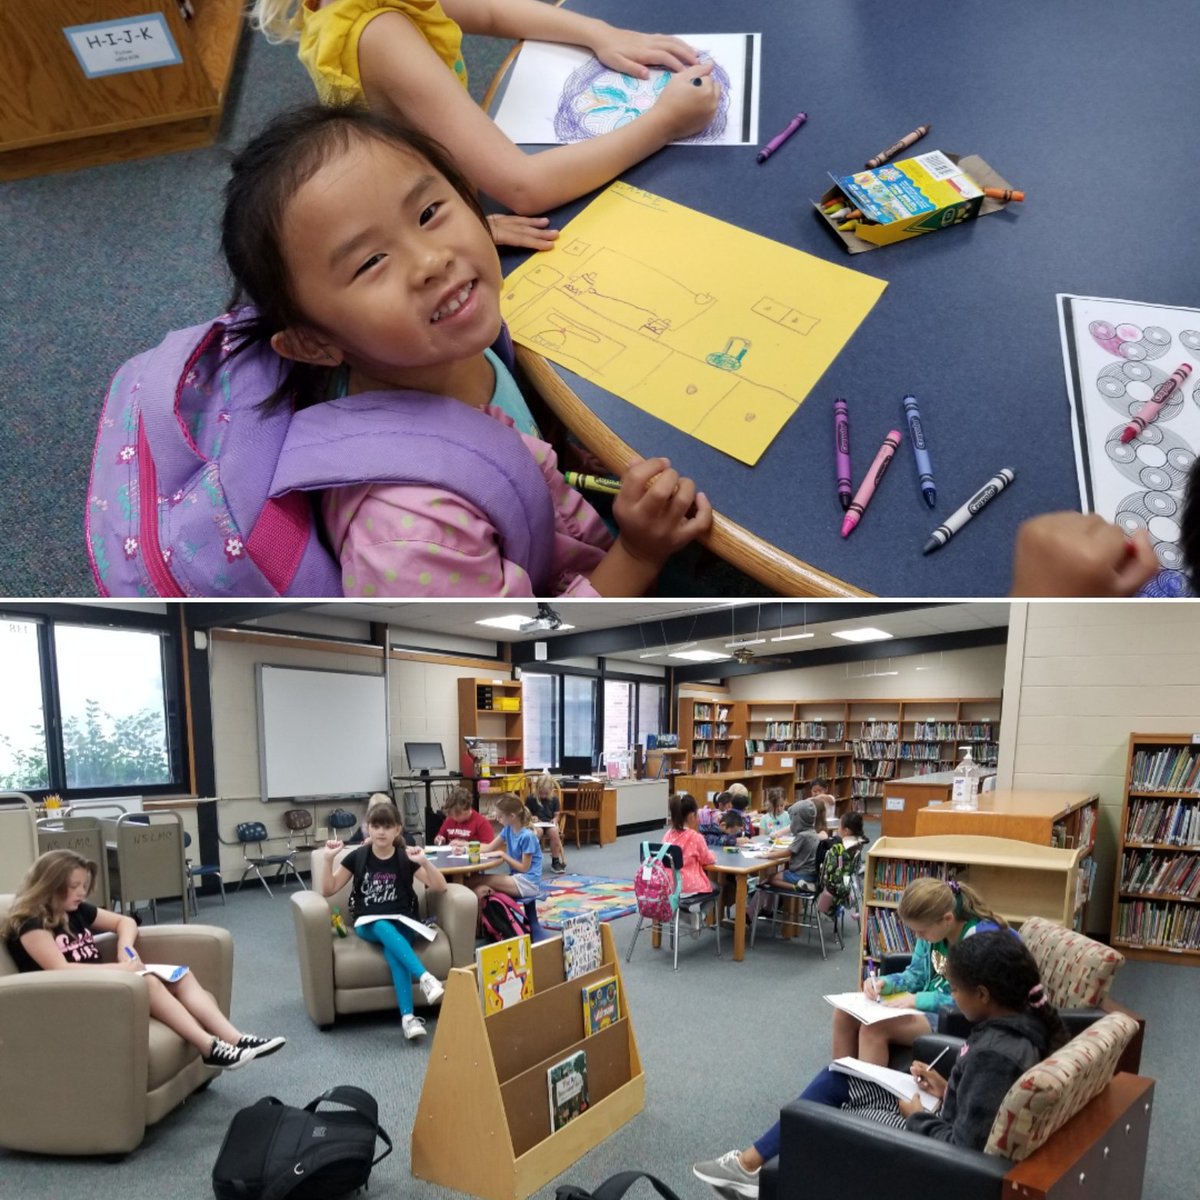 Morning clubs are up and running at Northside! #MakerspaceFun #DoodleBug #NorthsideNighthawks